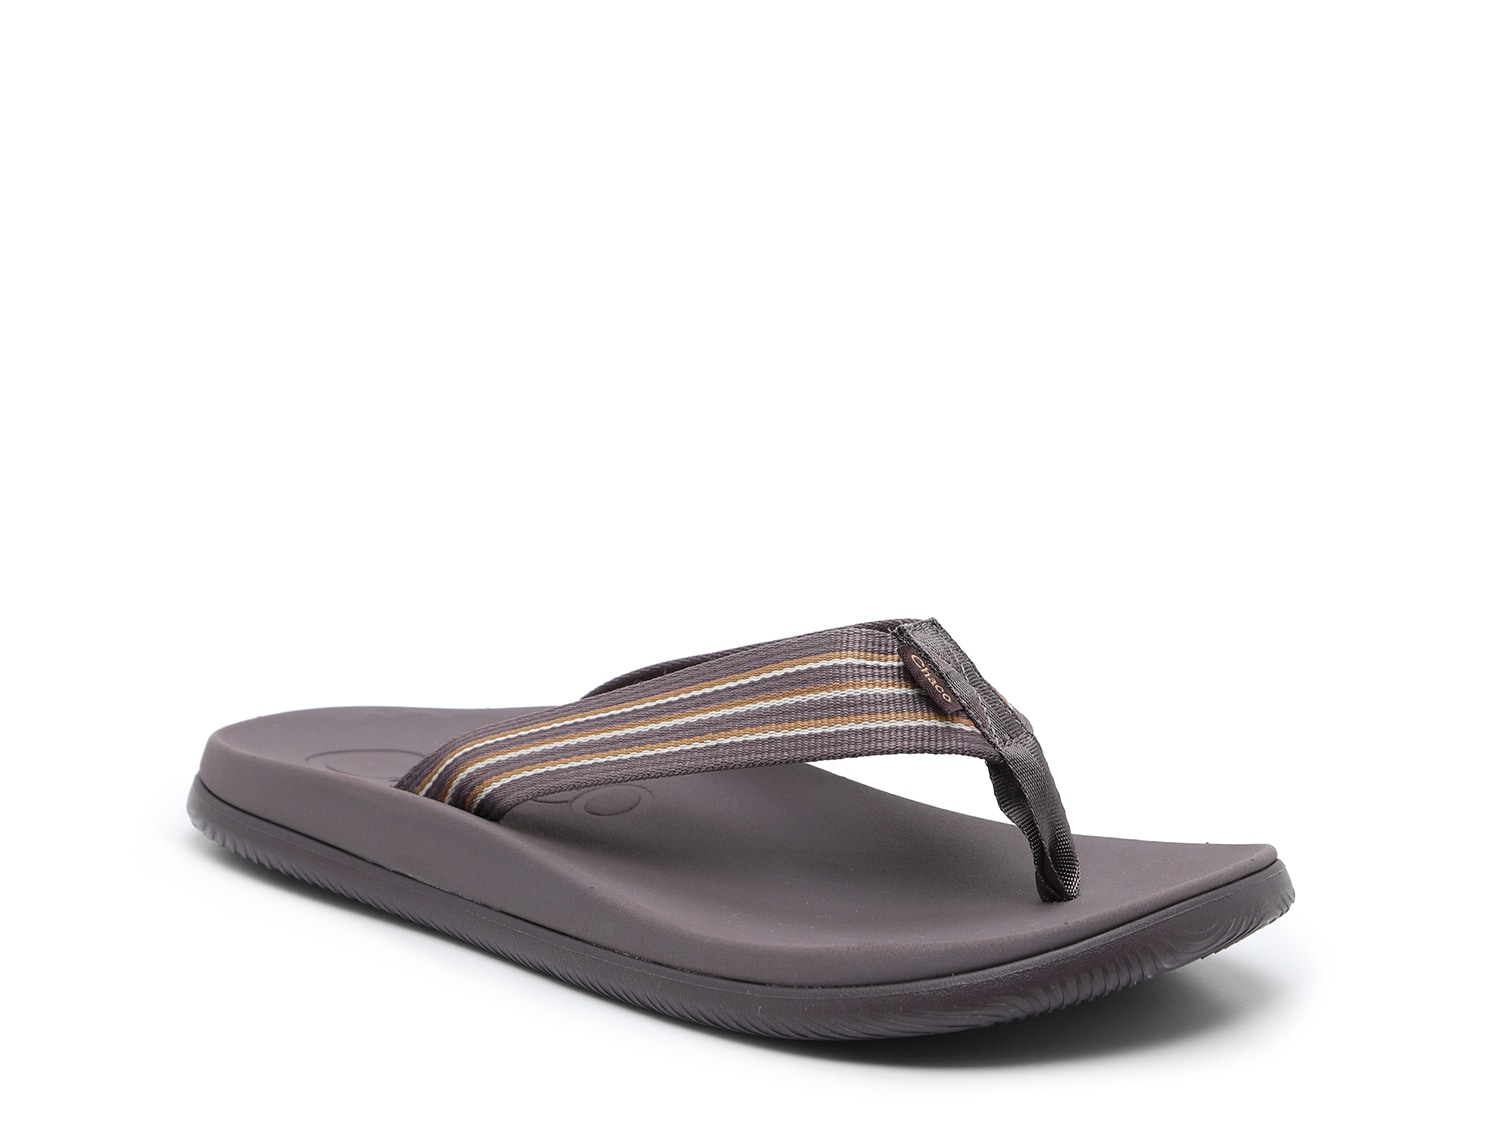 Chaco Chillos Flip Flop - Free Shipping | DSW